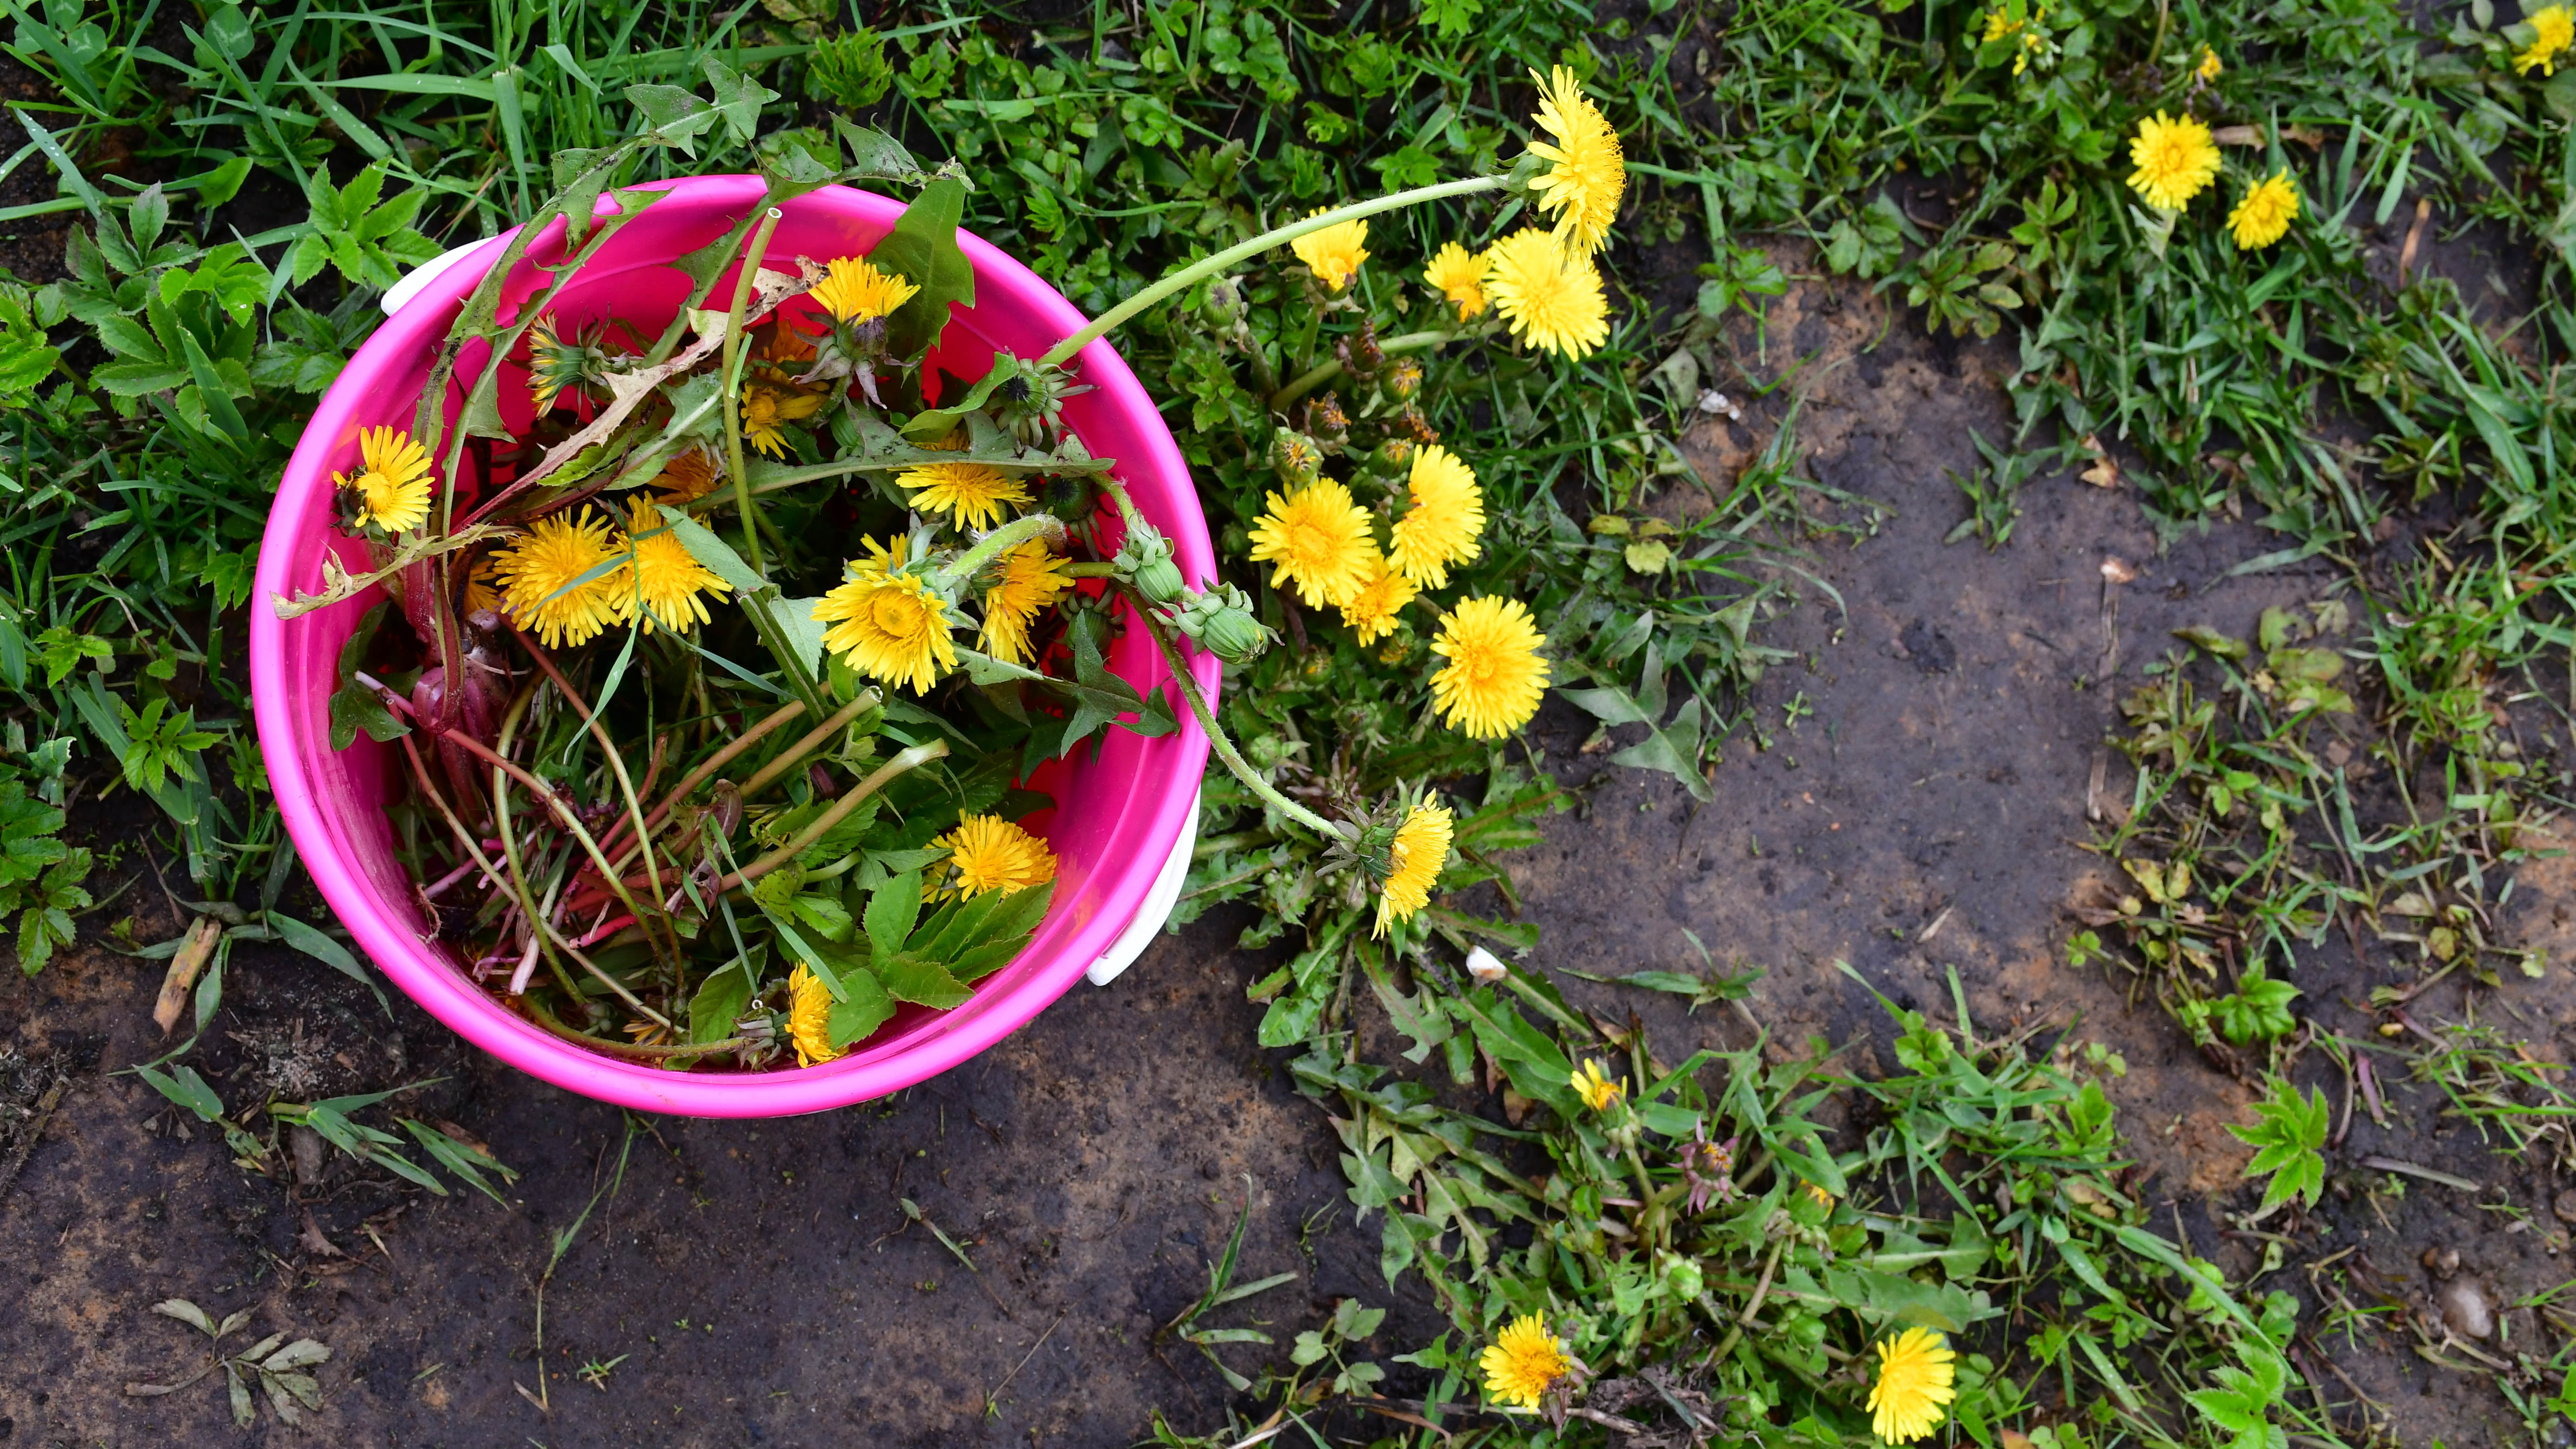 Dandelions which have been removed and placed into a bucket next to a bare patch in the grass